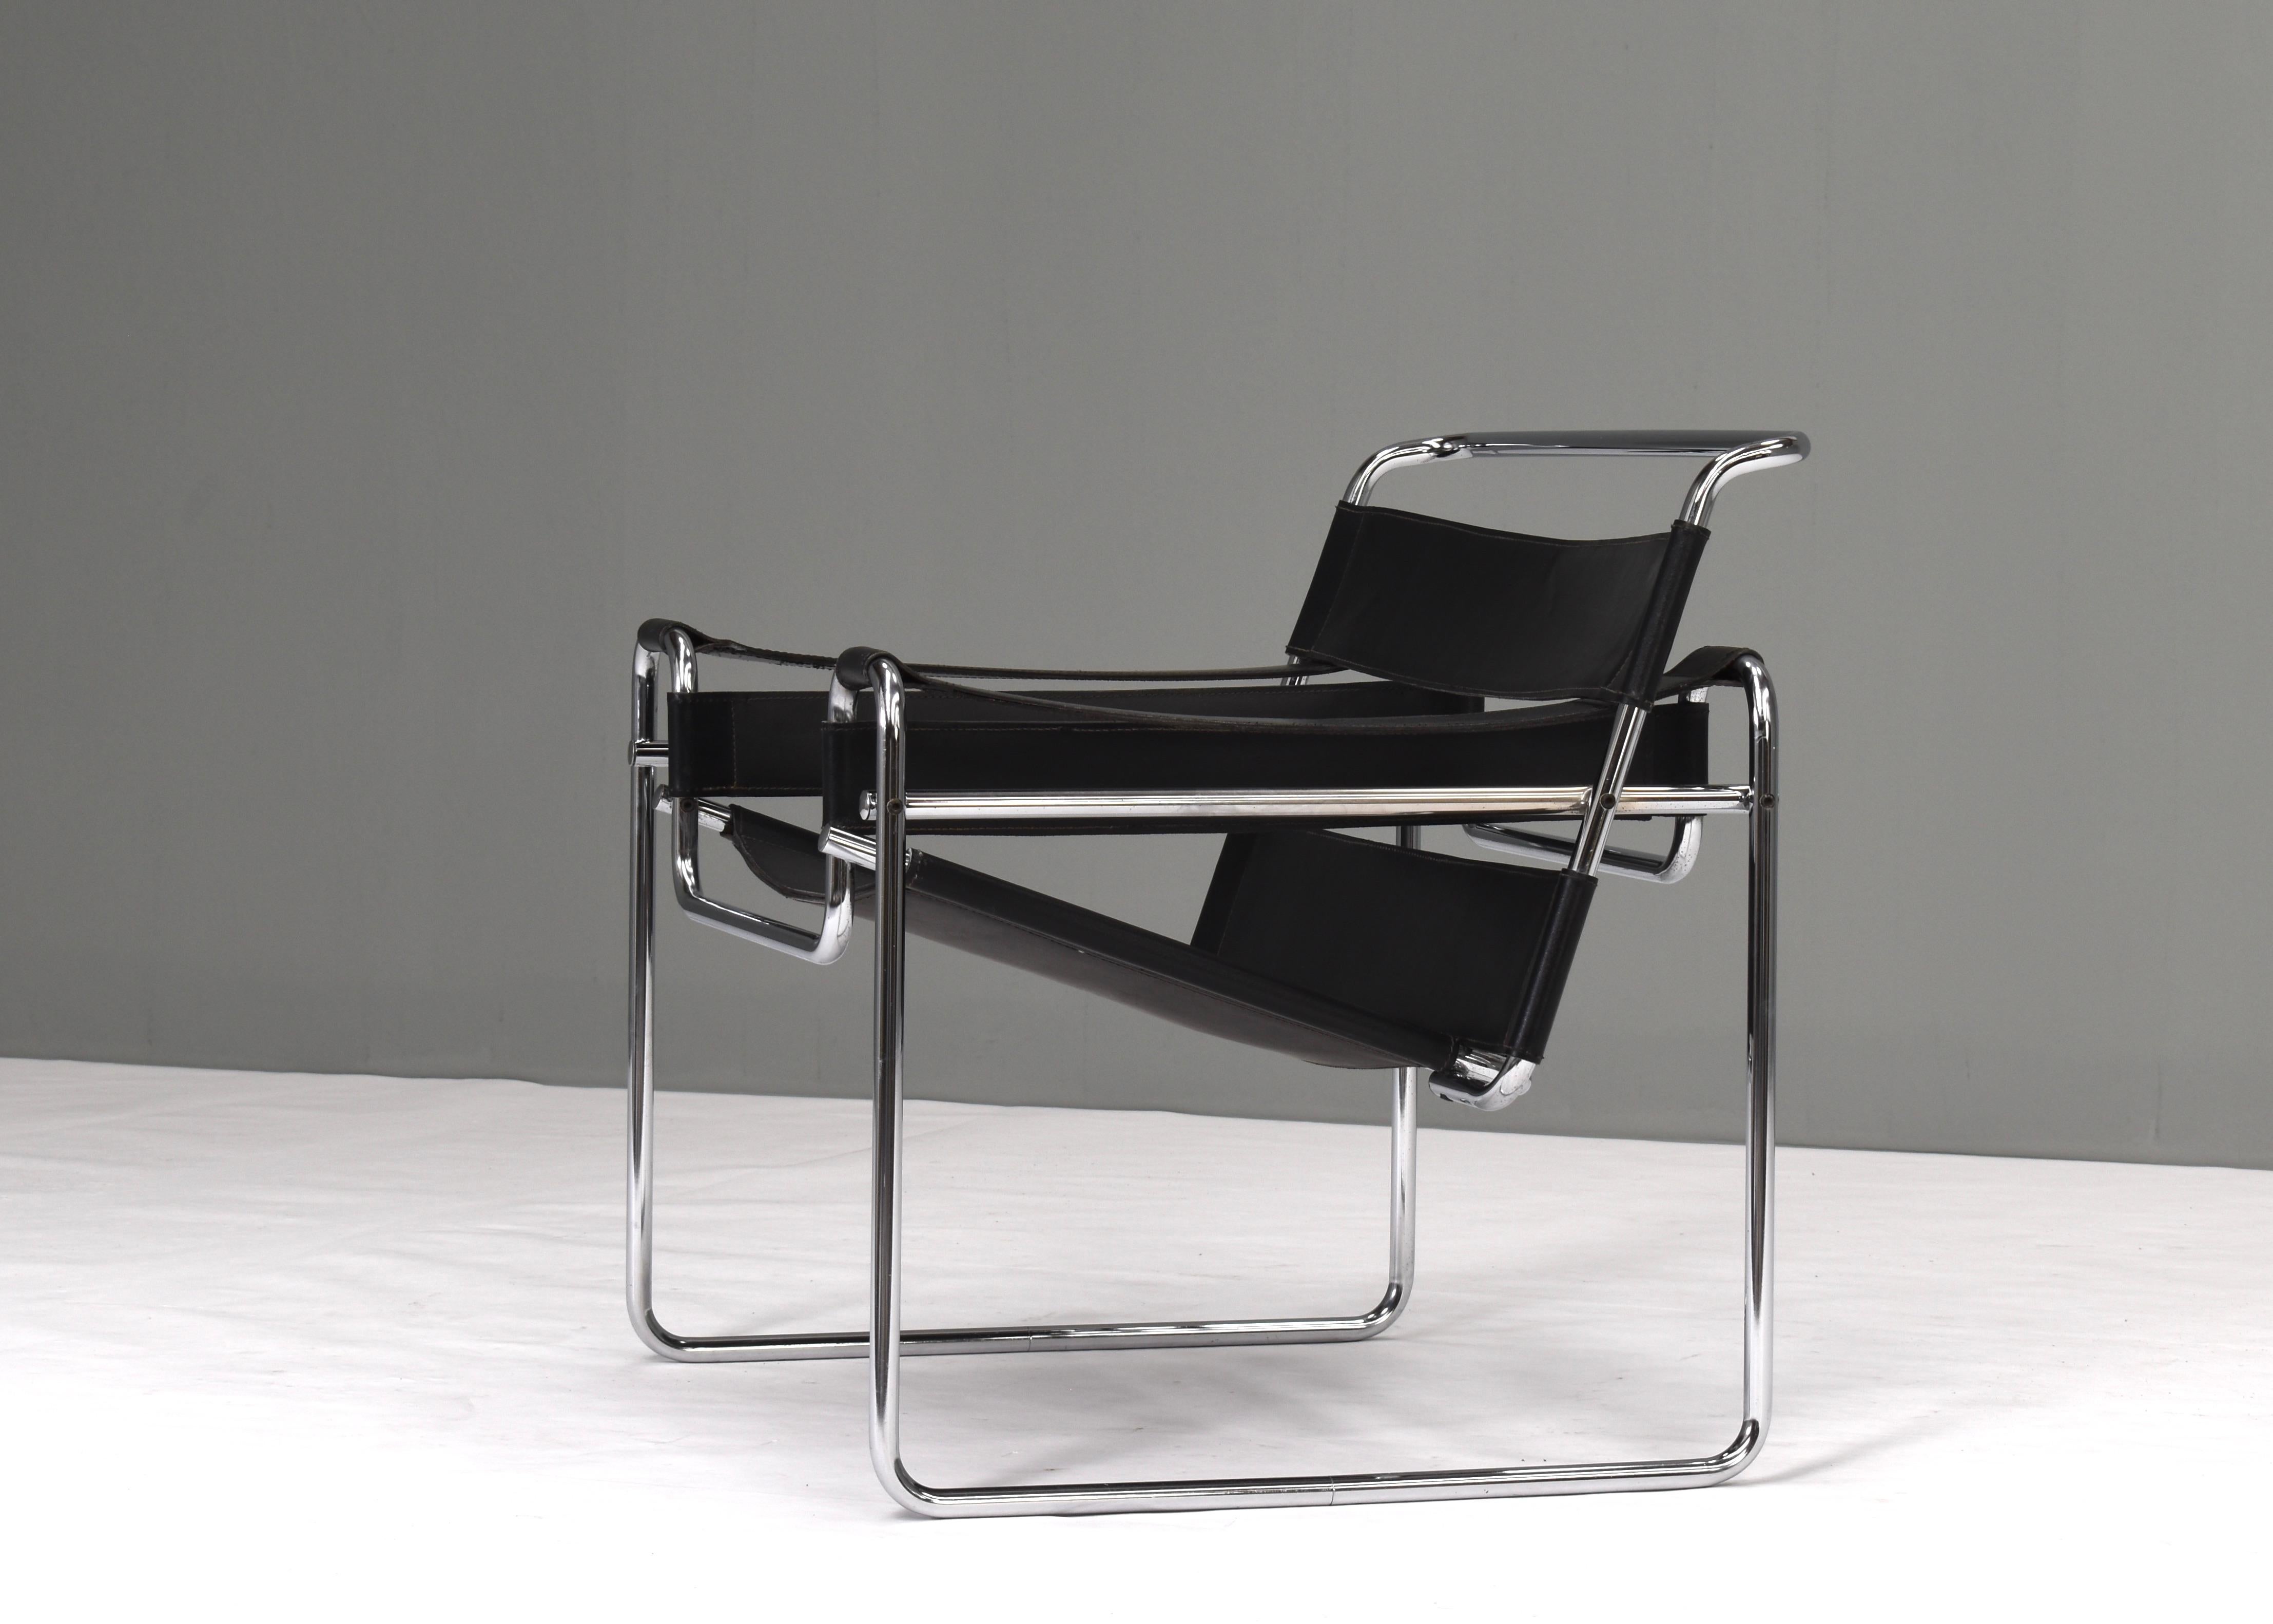 Bauhaus Wassily Chair by Marcel Breuer for Knoll in Black Leather circa 1970-80